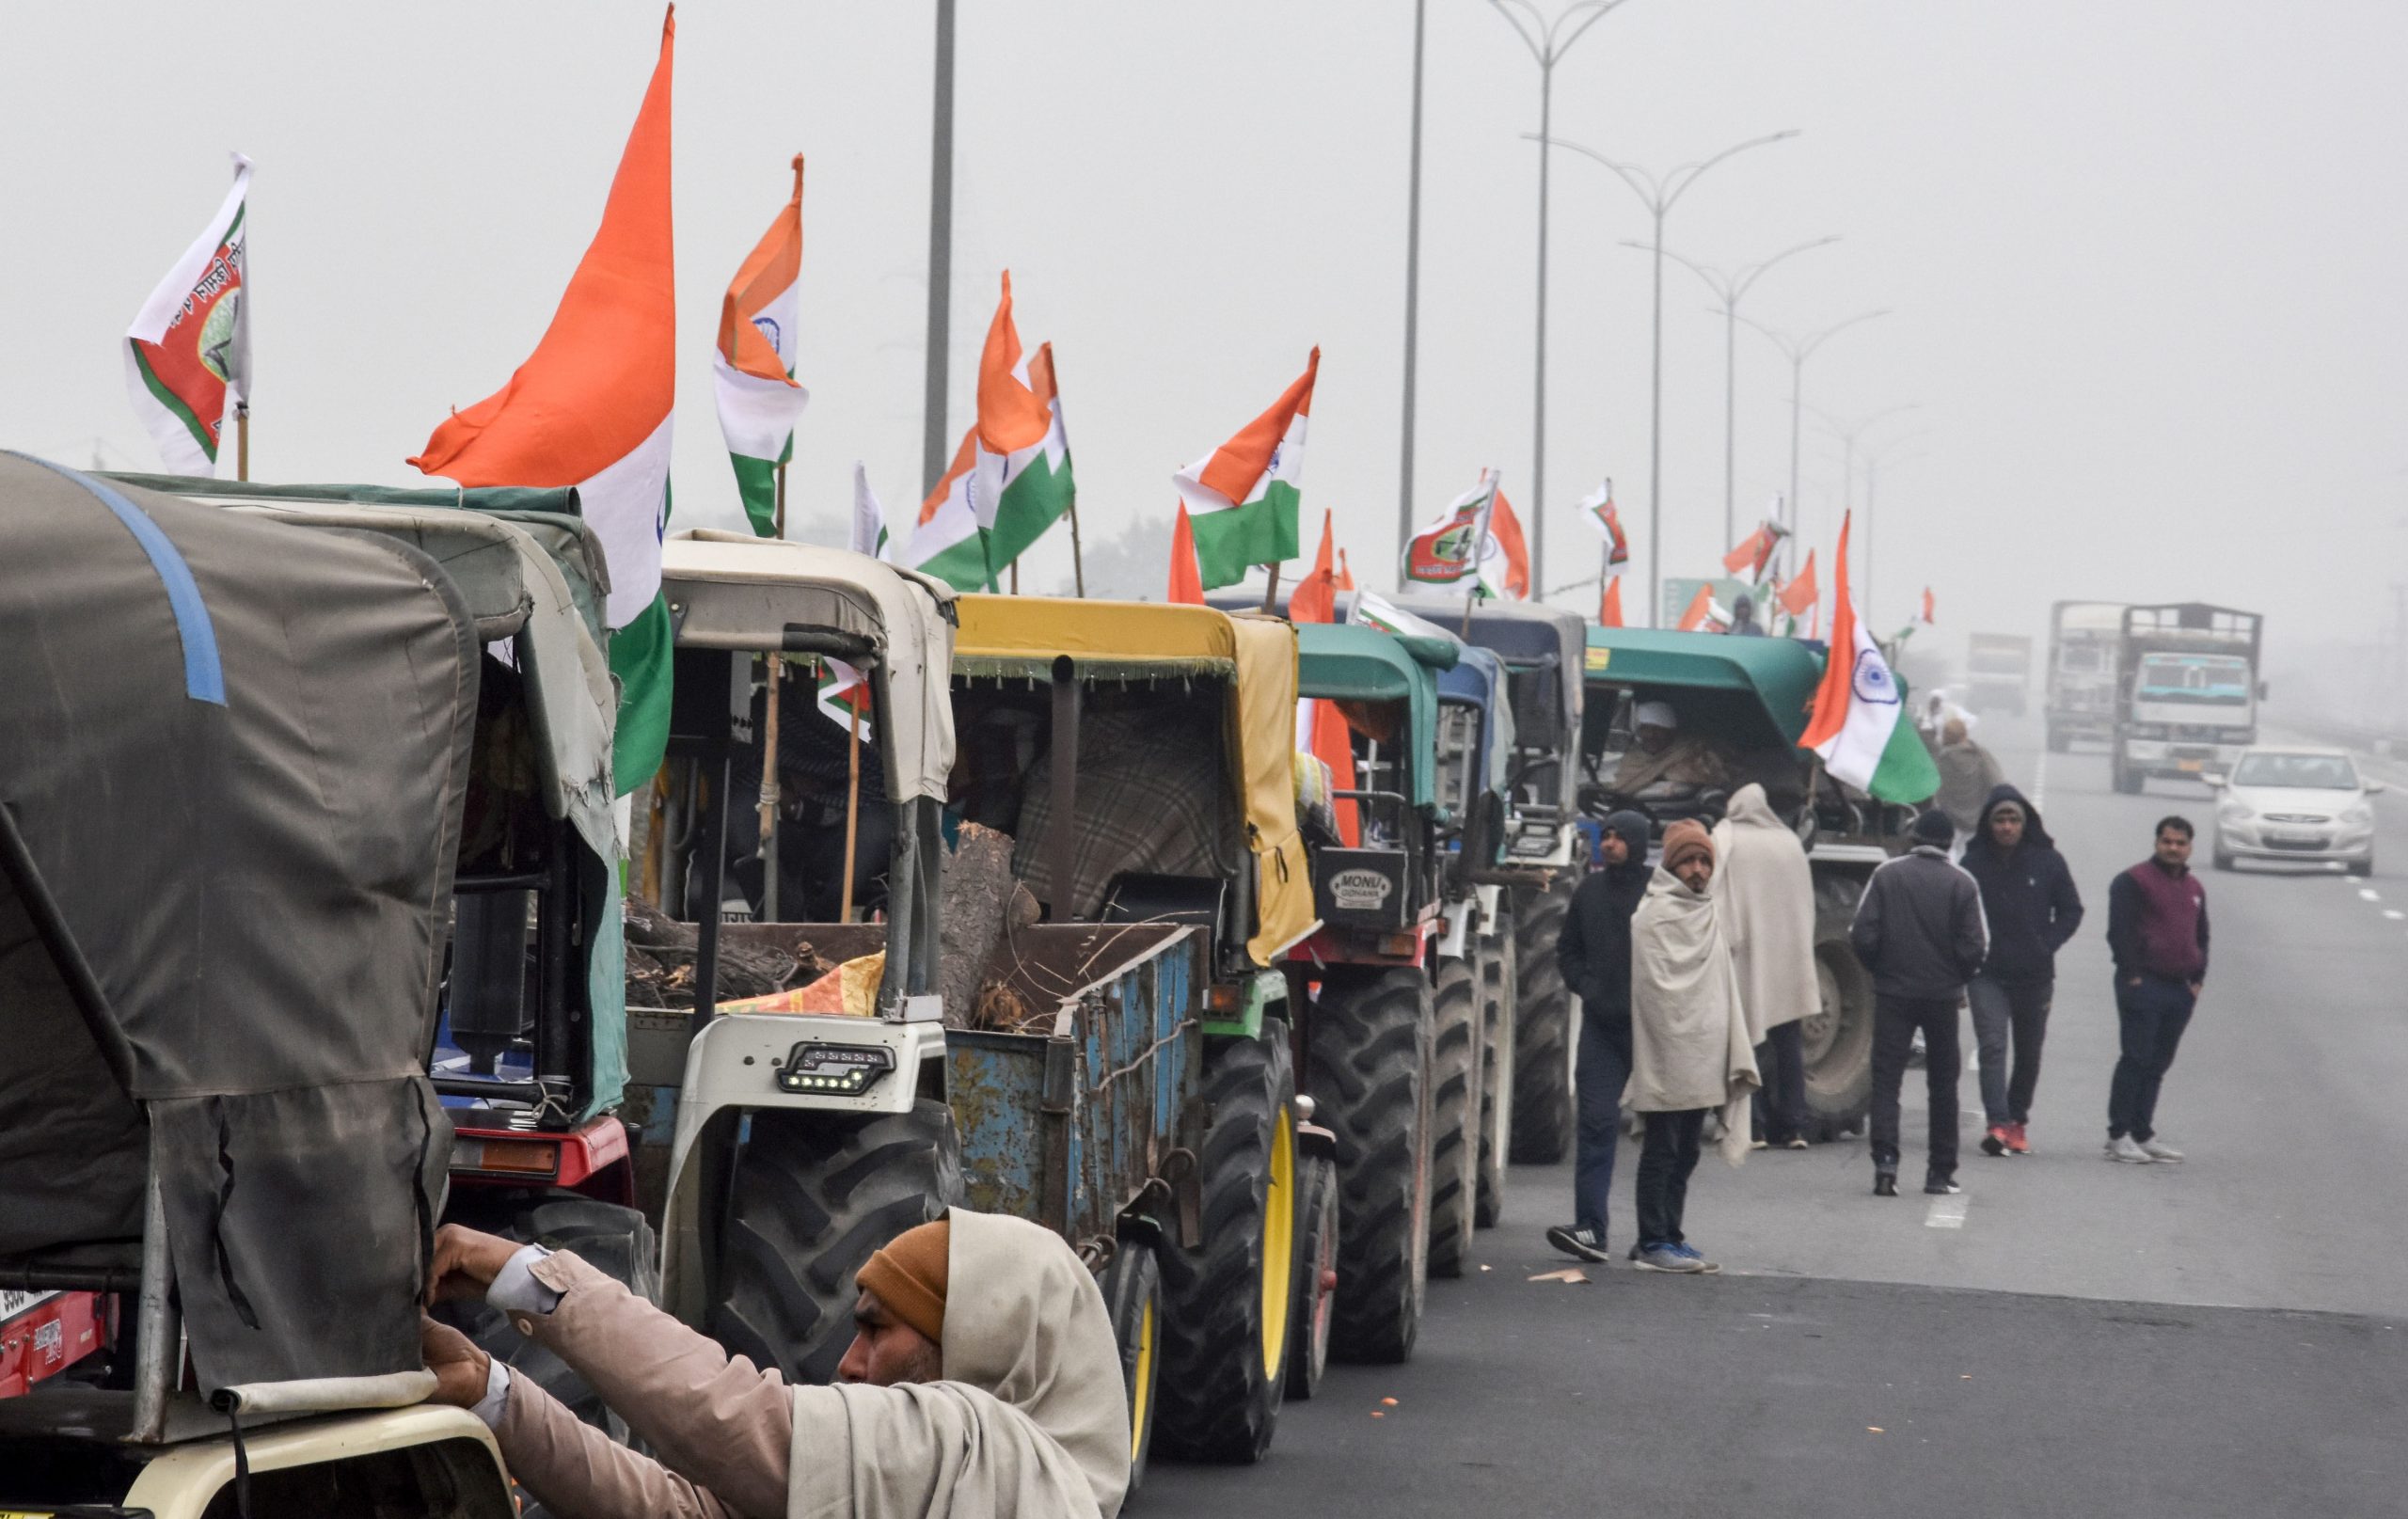 Kundli, Assaudha interchanges will not be accessible: Haryana police issues advisory ahead  tractor rally